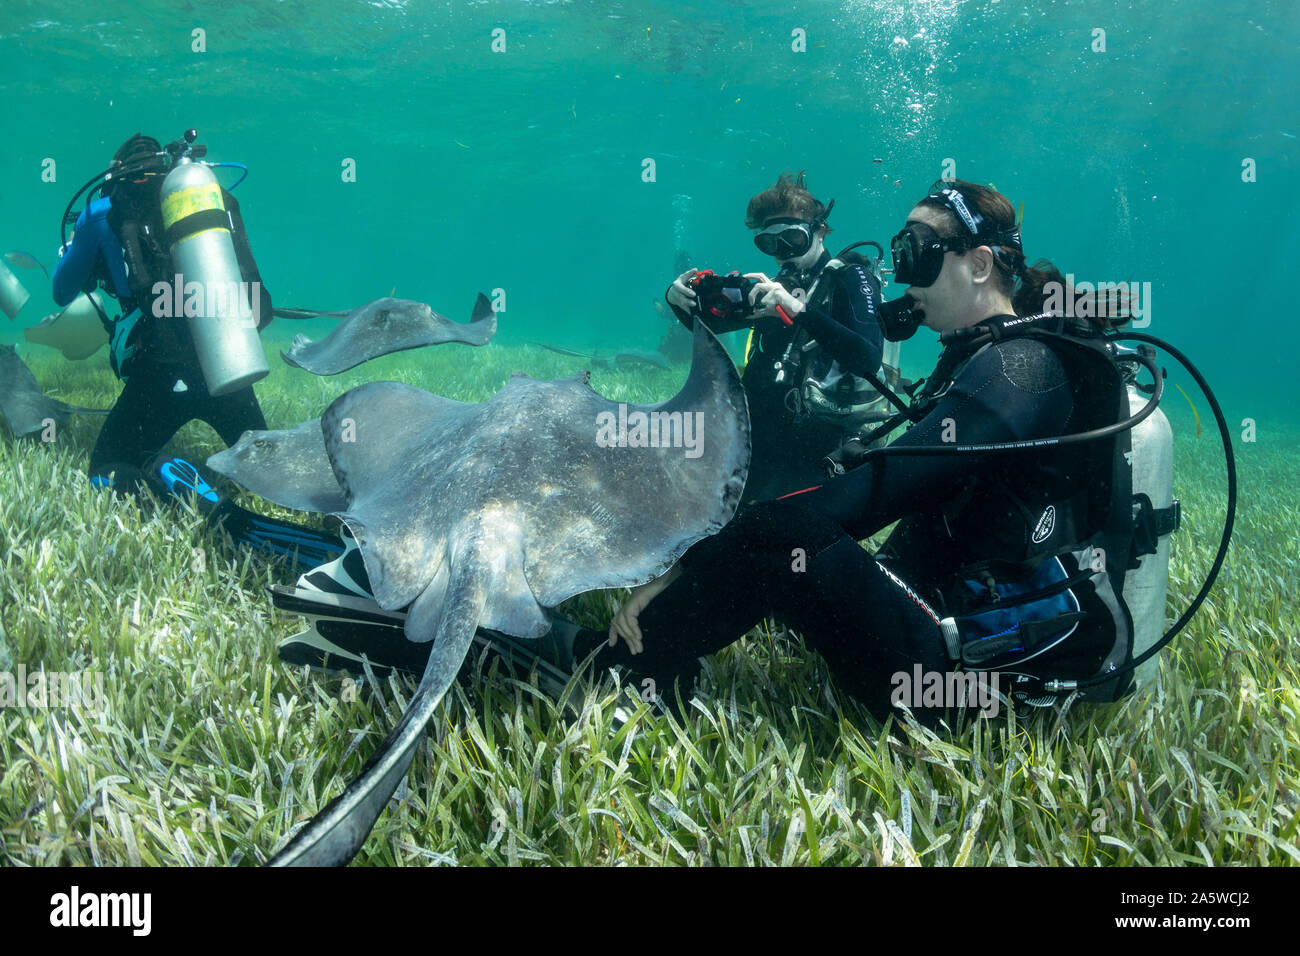 Scuba divers watch southern stingrays (Hypanus americanus) swim around the shallow seagrass beds during a feeding dive. Stock Photo